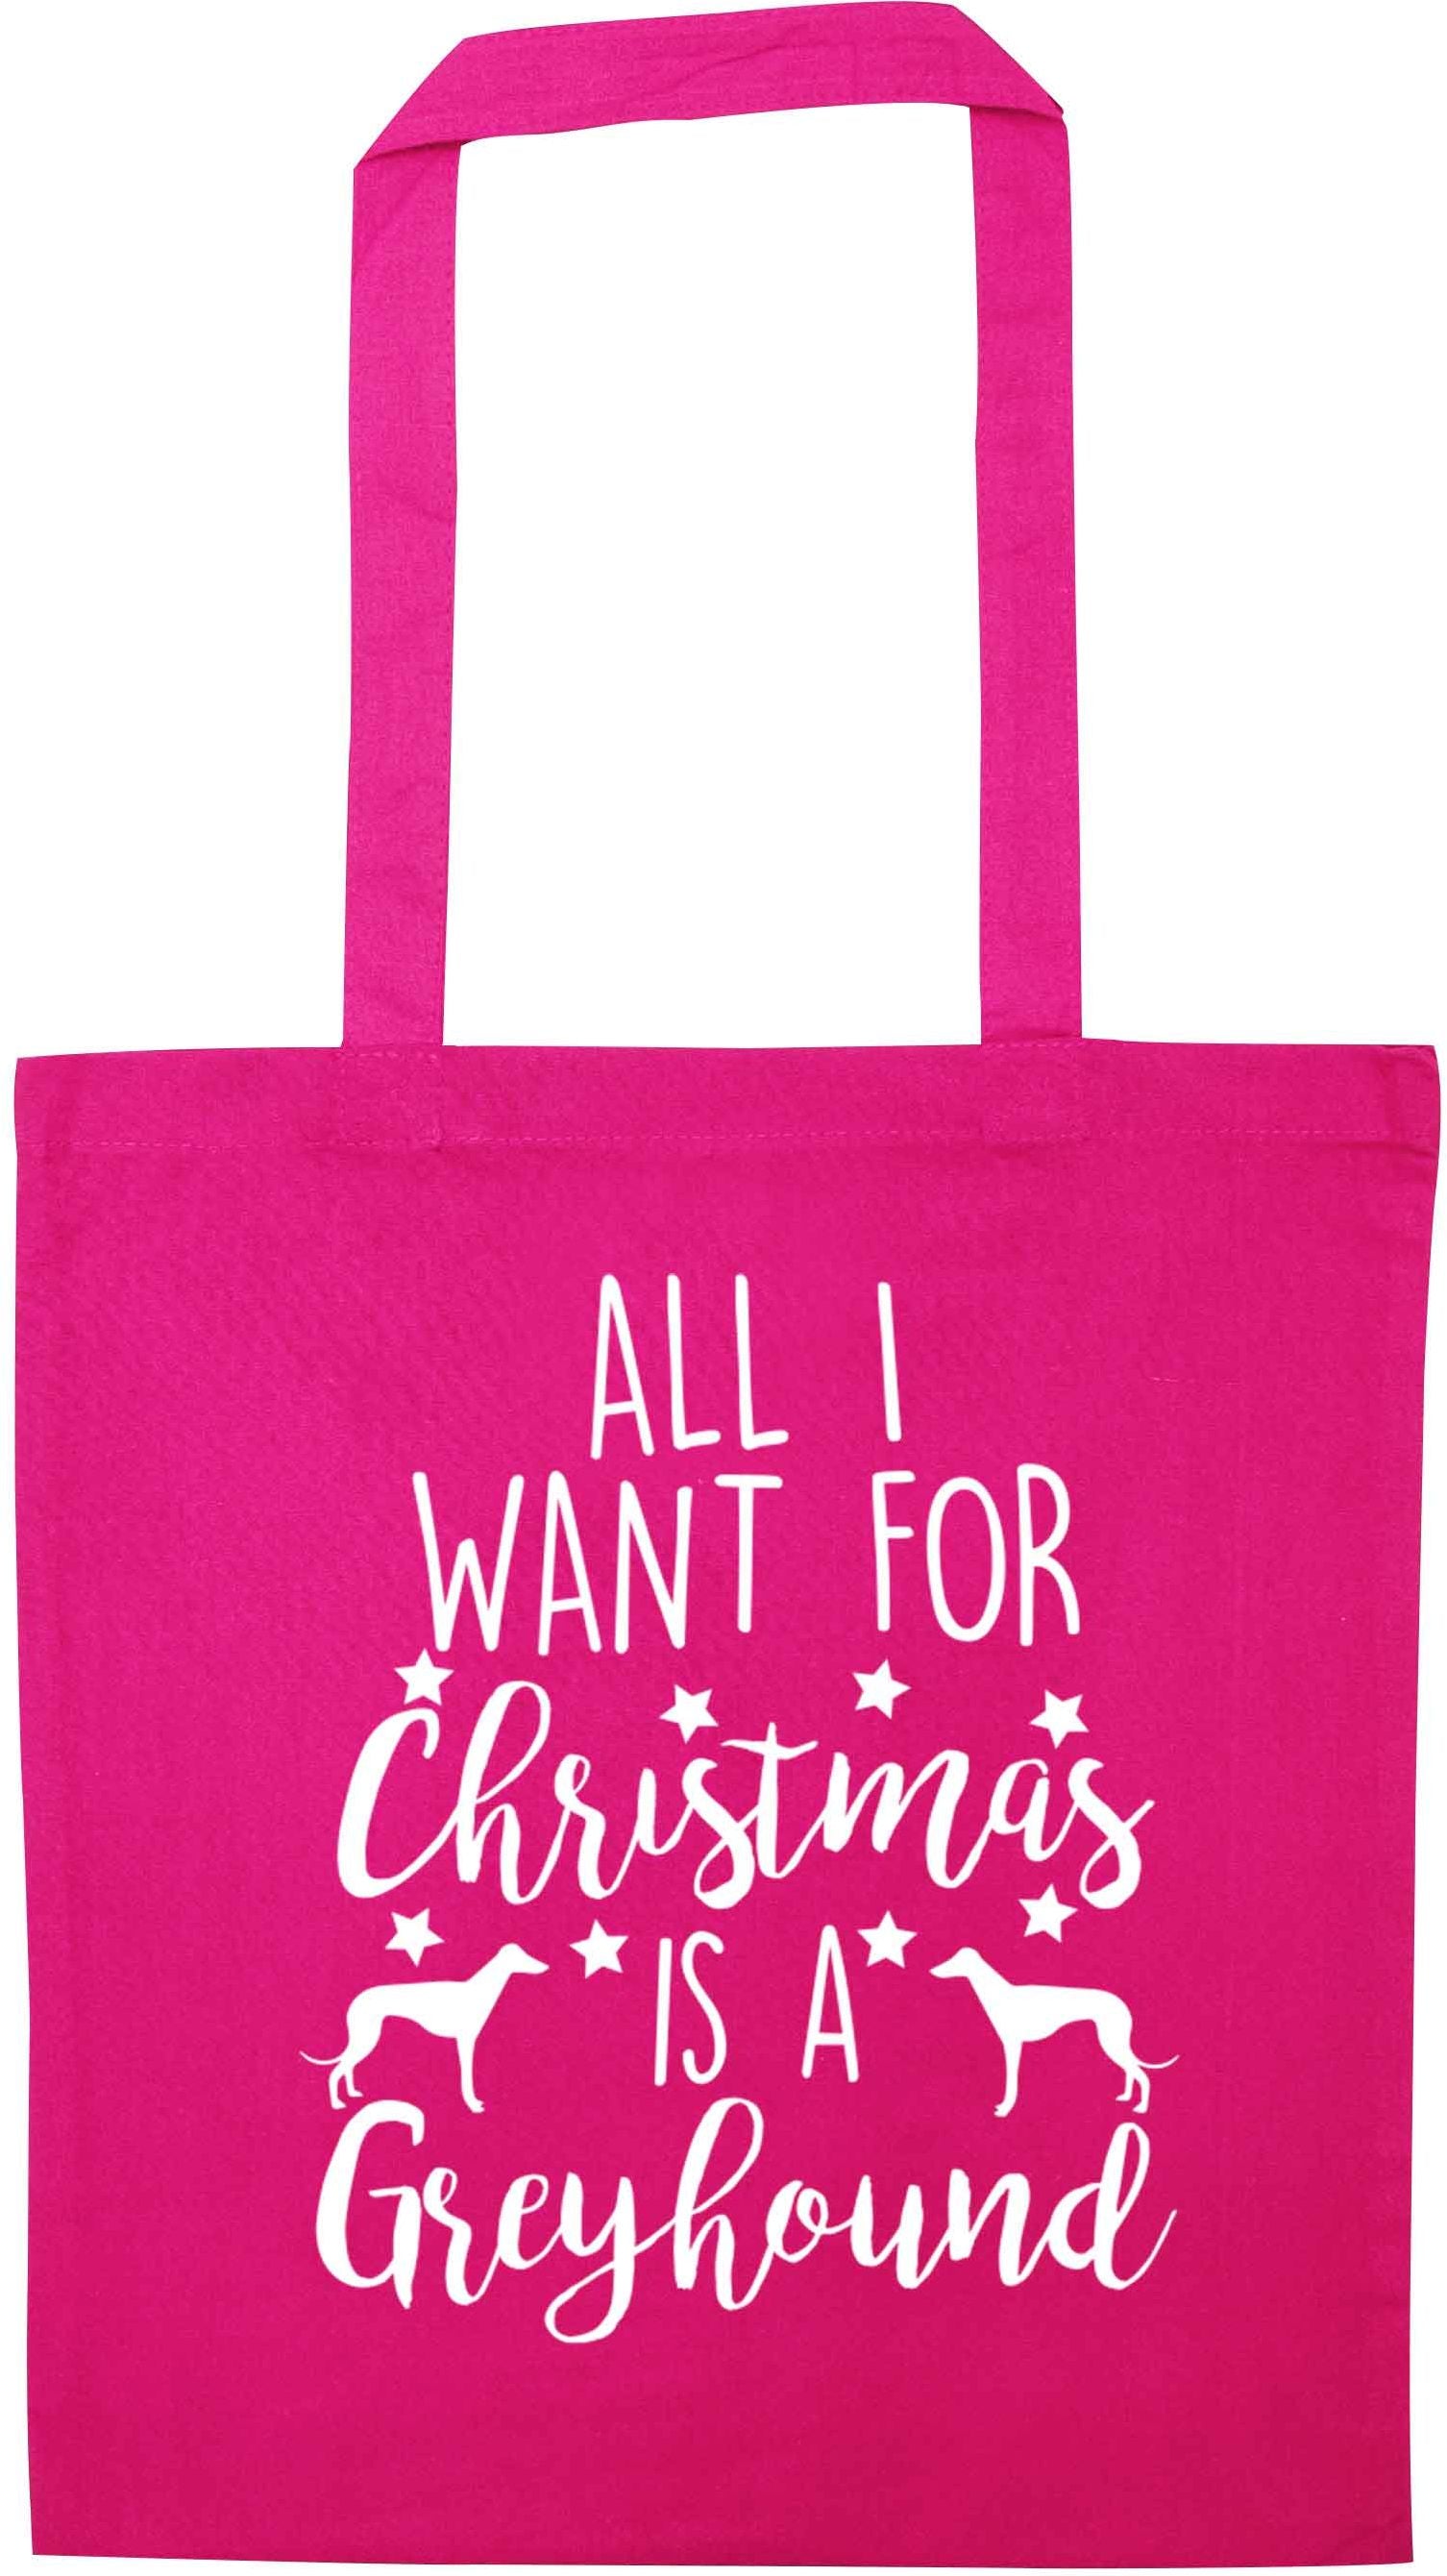 All I want for Christmas is a greyhound pink tote bag